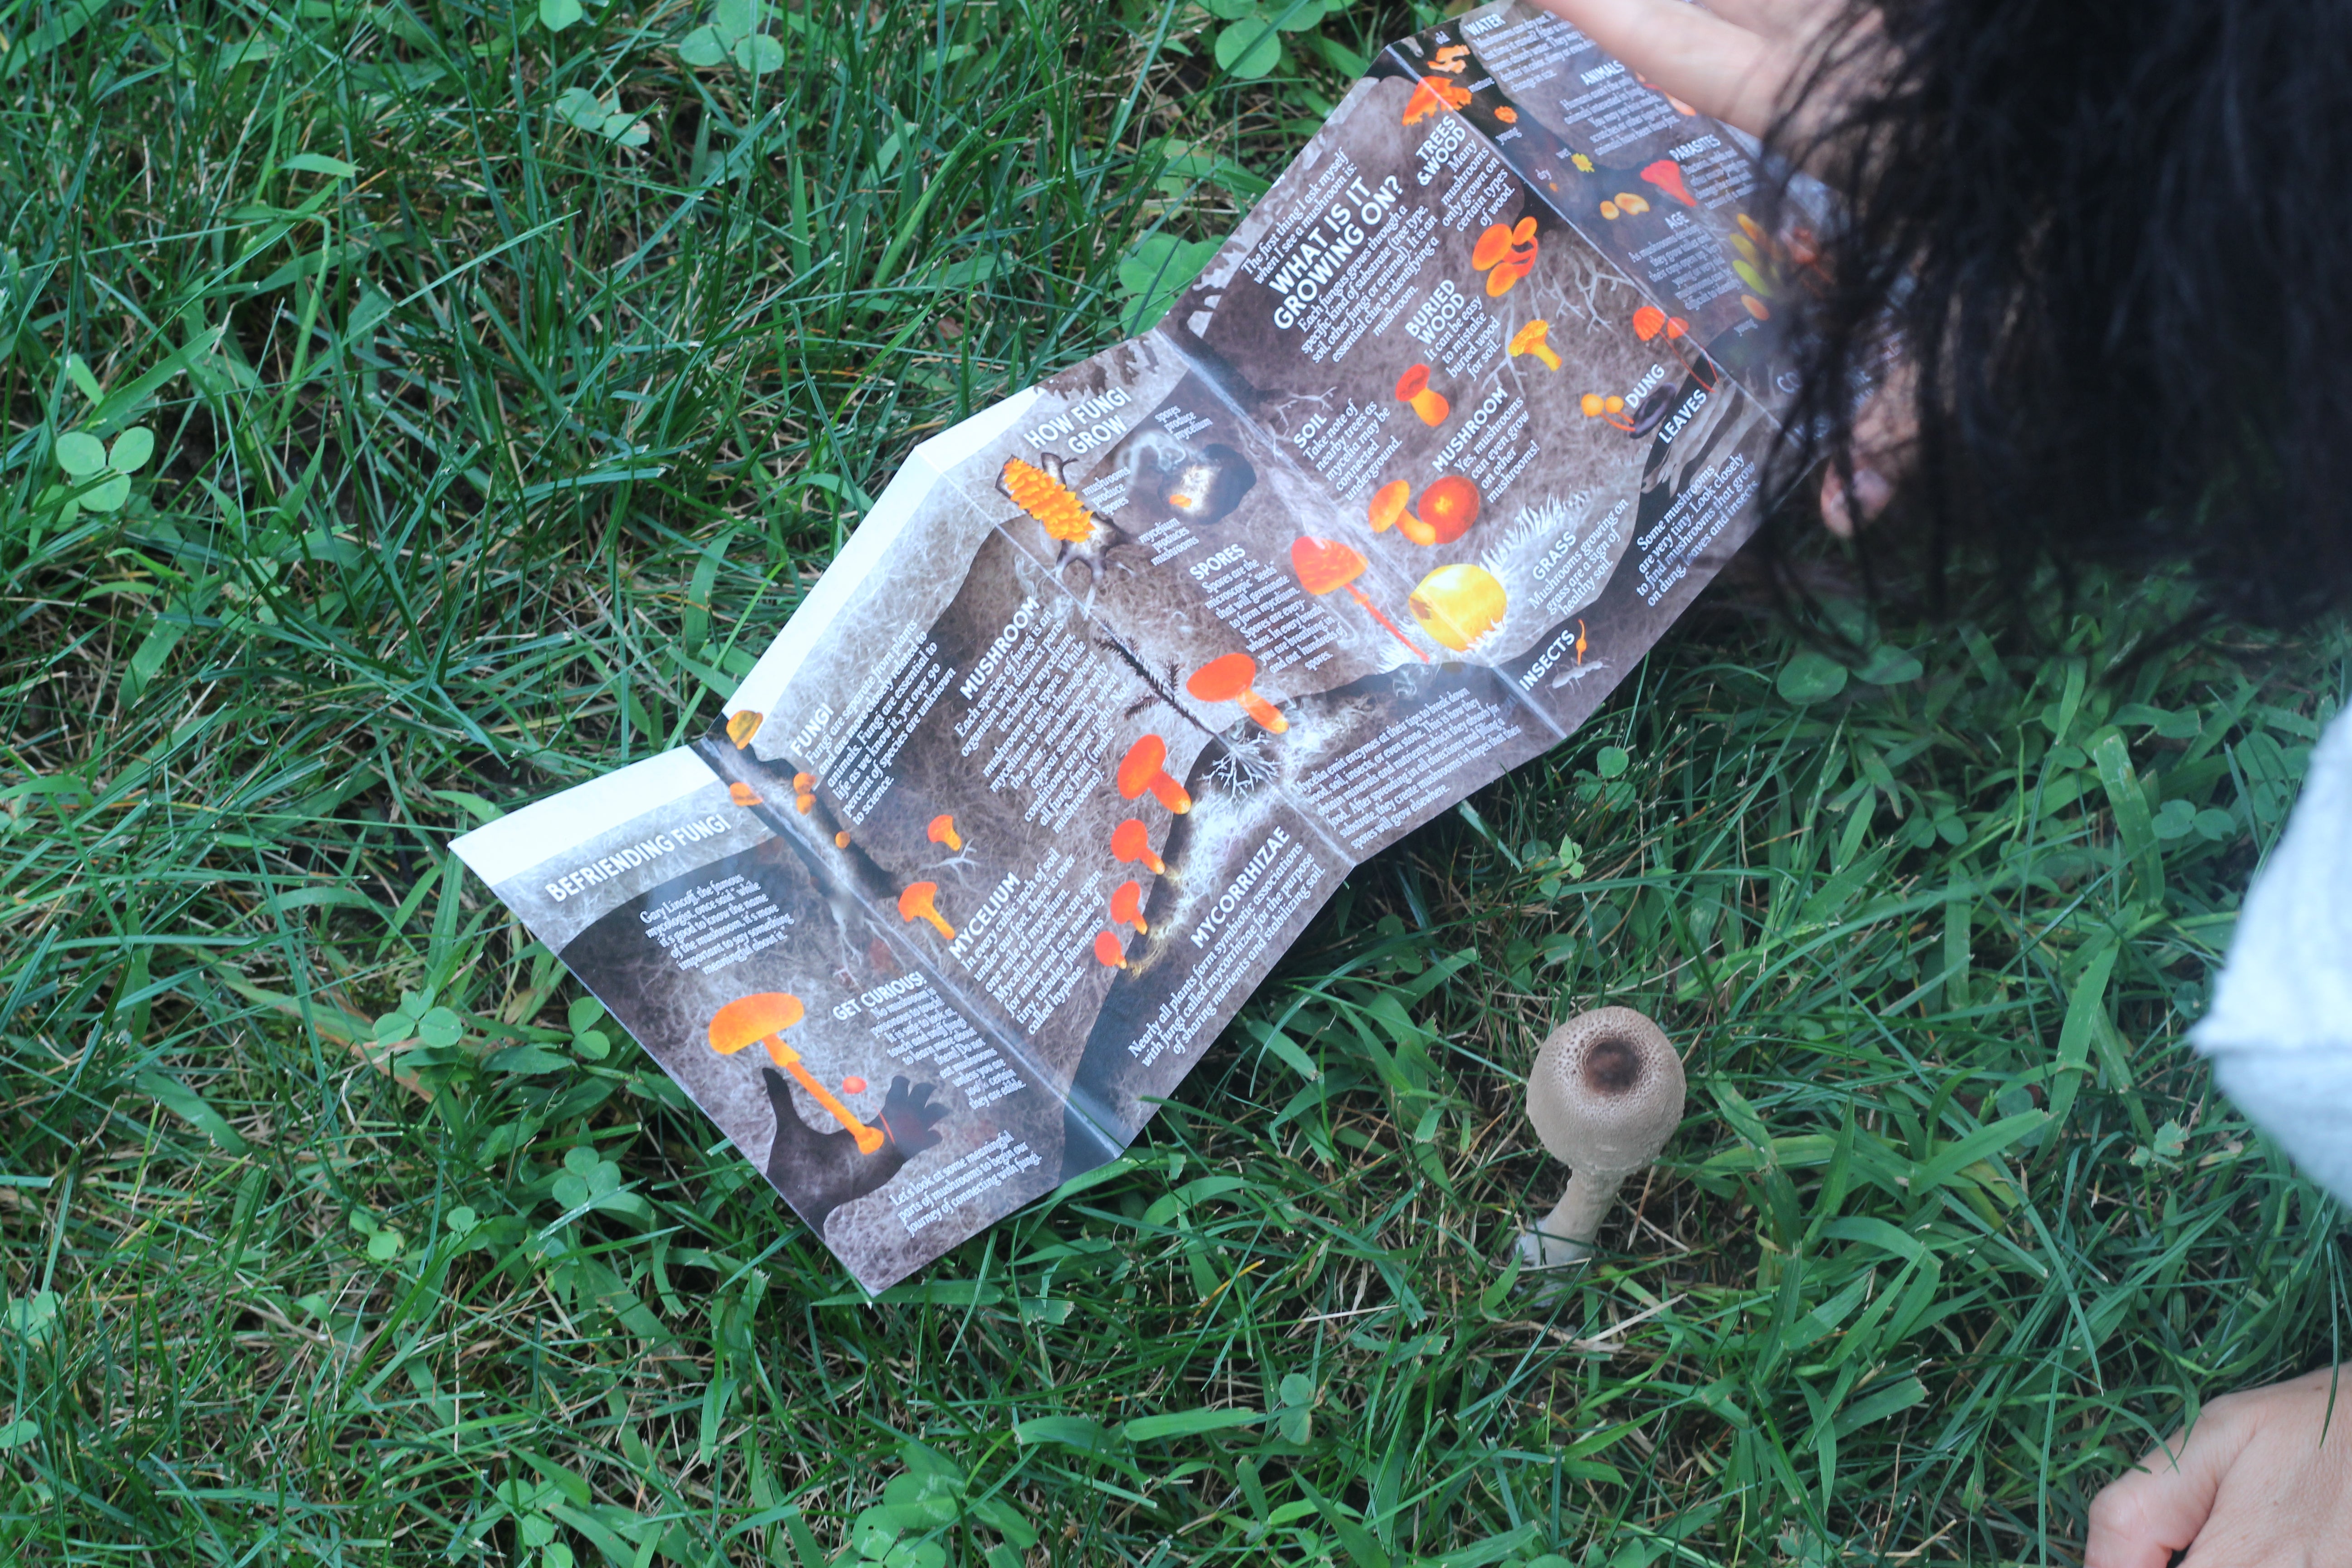 A photo Roberta Trentin's holding Befriending Fungi: A Pocket Guide by John Michelotti and Renee Baumann while she sits in the grass next to a mushroom. This accordion folded guide is opened up for viewer to see the amazing ways they can be Befriending Fungi. Want to get into mushroom hunting? She holds the Befriending Fungi Pocket Guide open next to a mushroom she is using the Befriending Fungi A Pocket guide written and produced by Catskill Fungi..